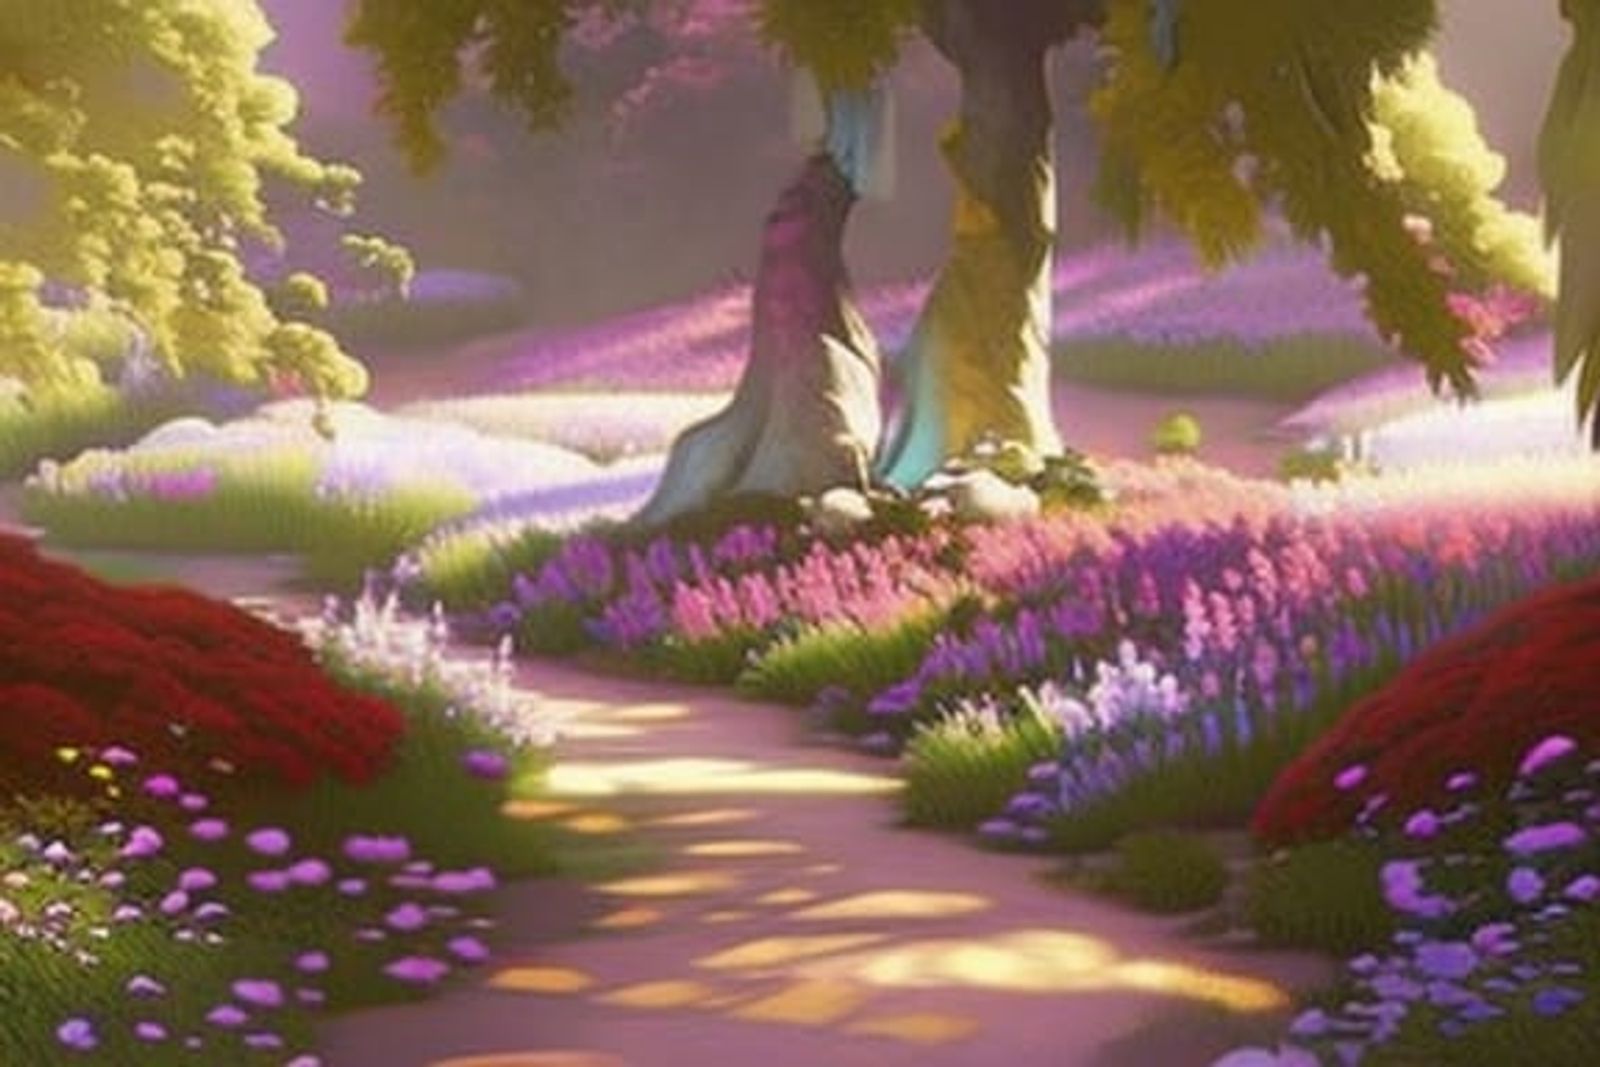 most beautiful flowers animated wallpapers